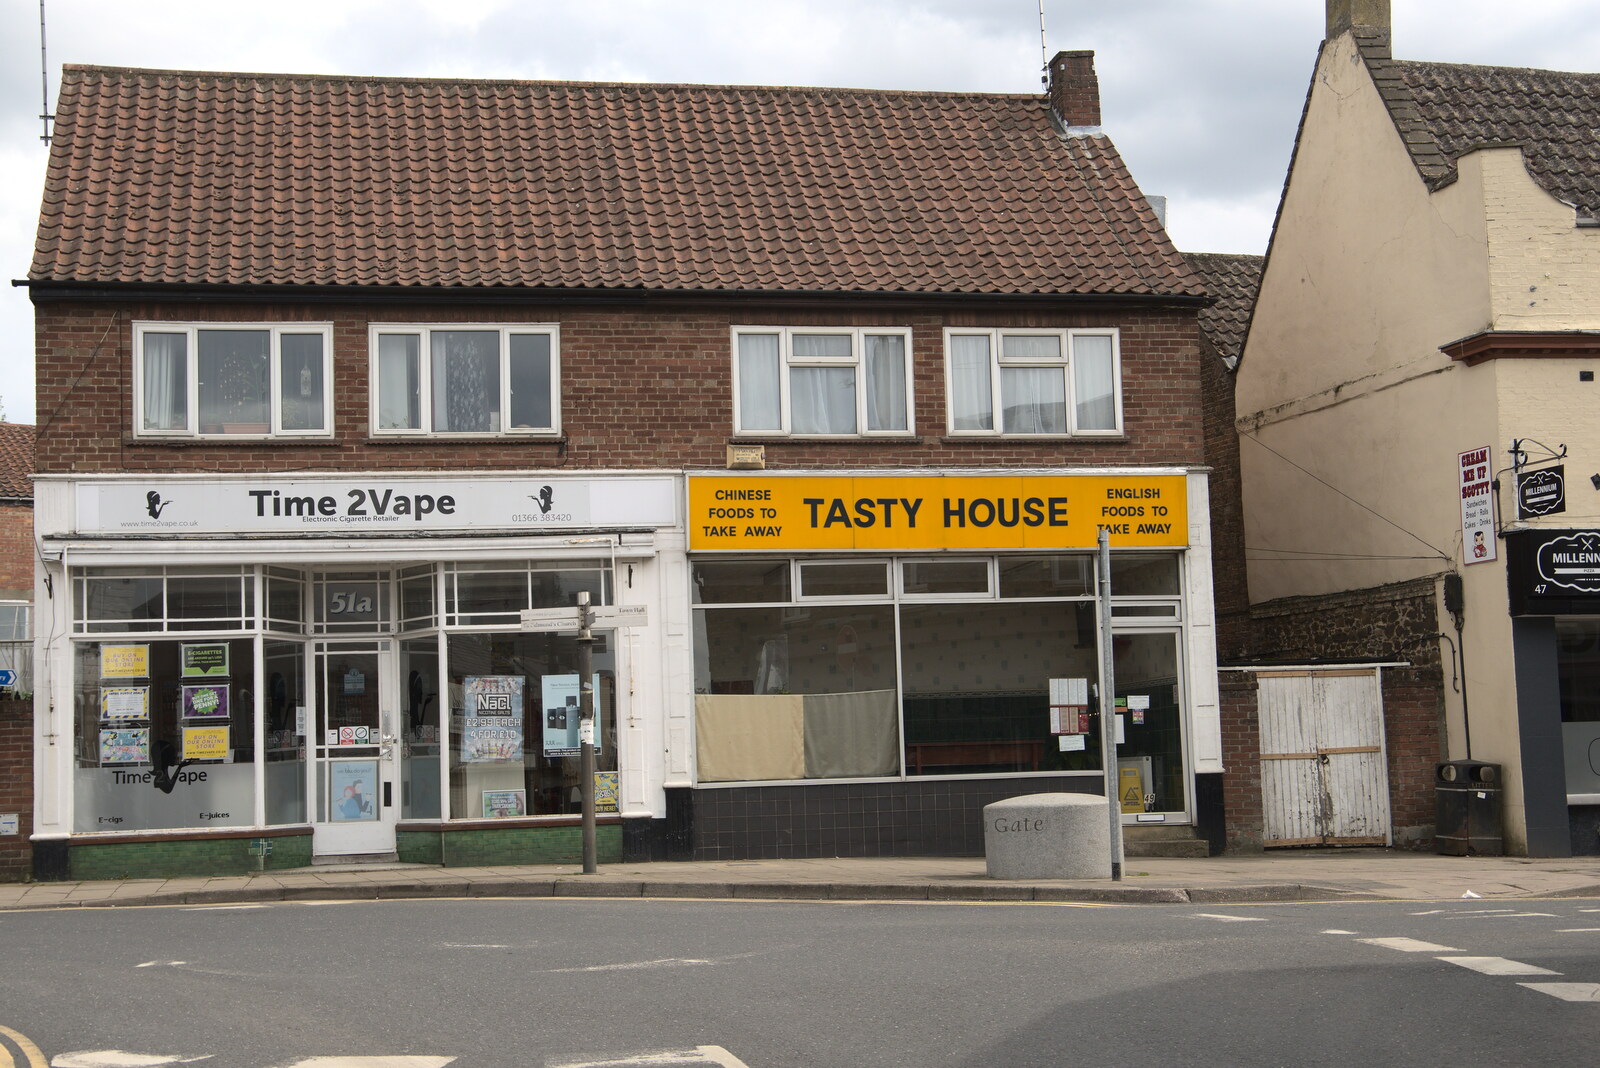 The anonymous 'Tasty House' in Downham Market from A Vaccination Afternoon, Swaffham, Norfolk - 9th May 2021